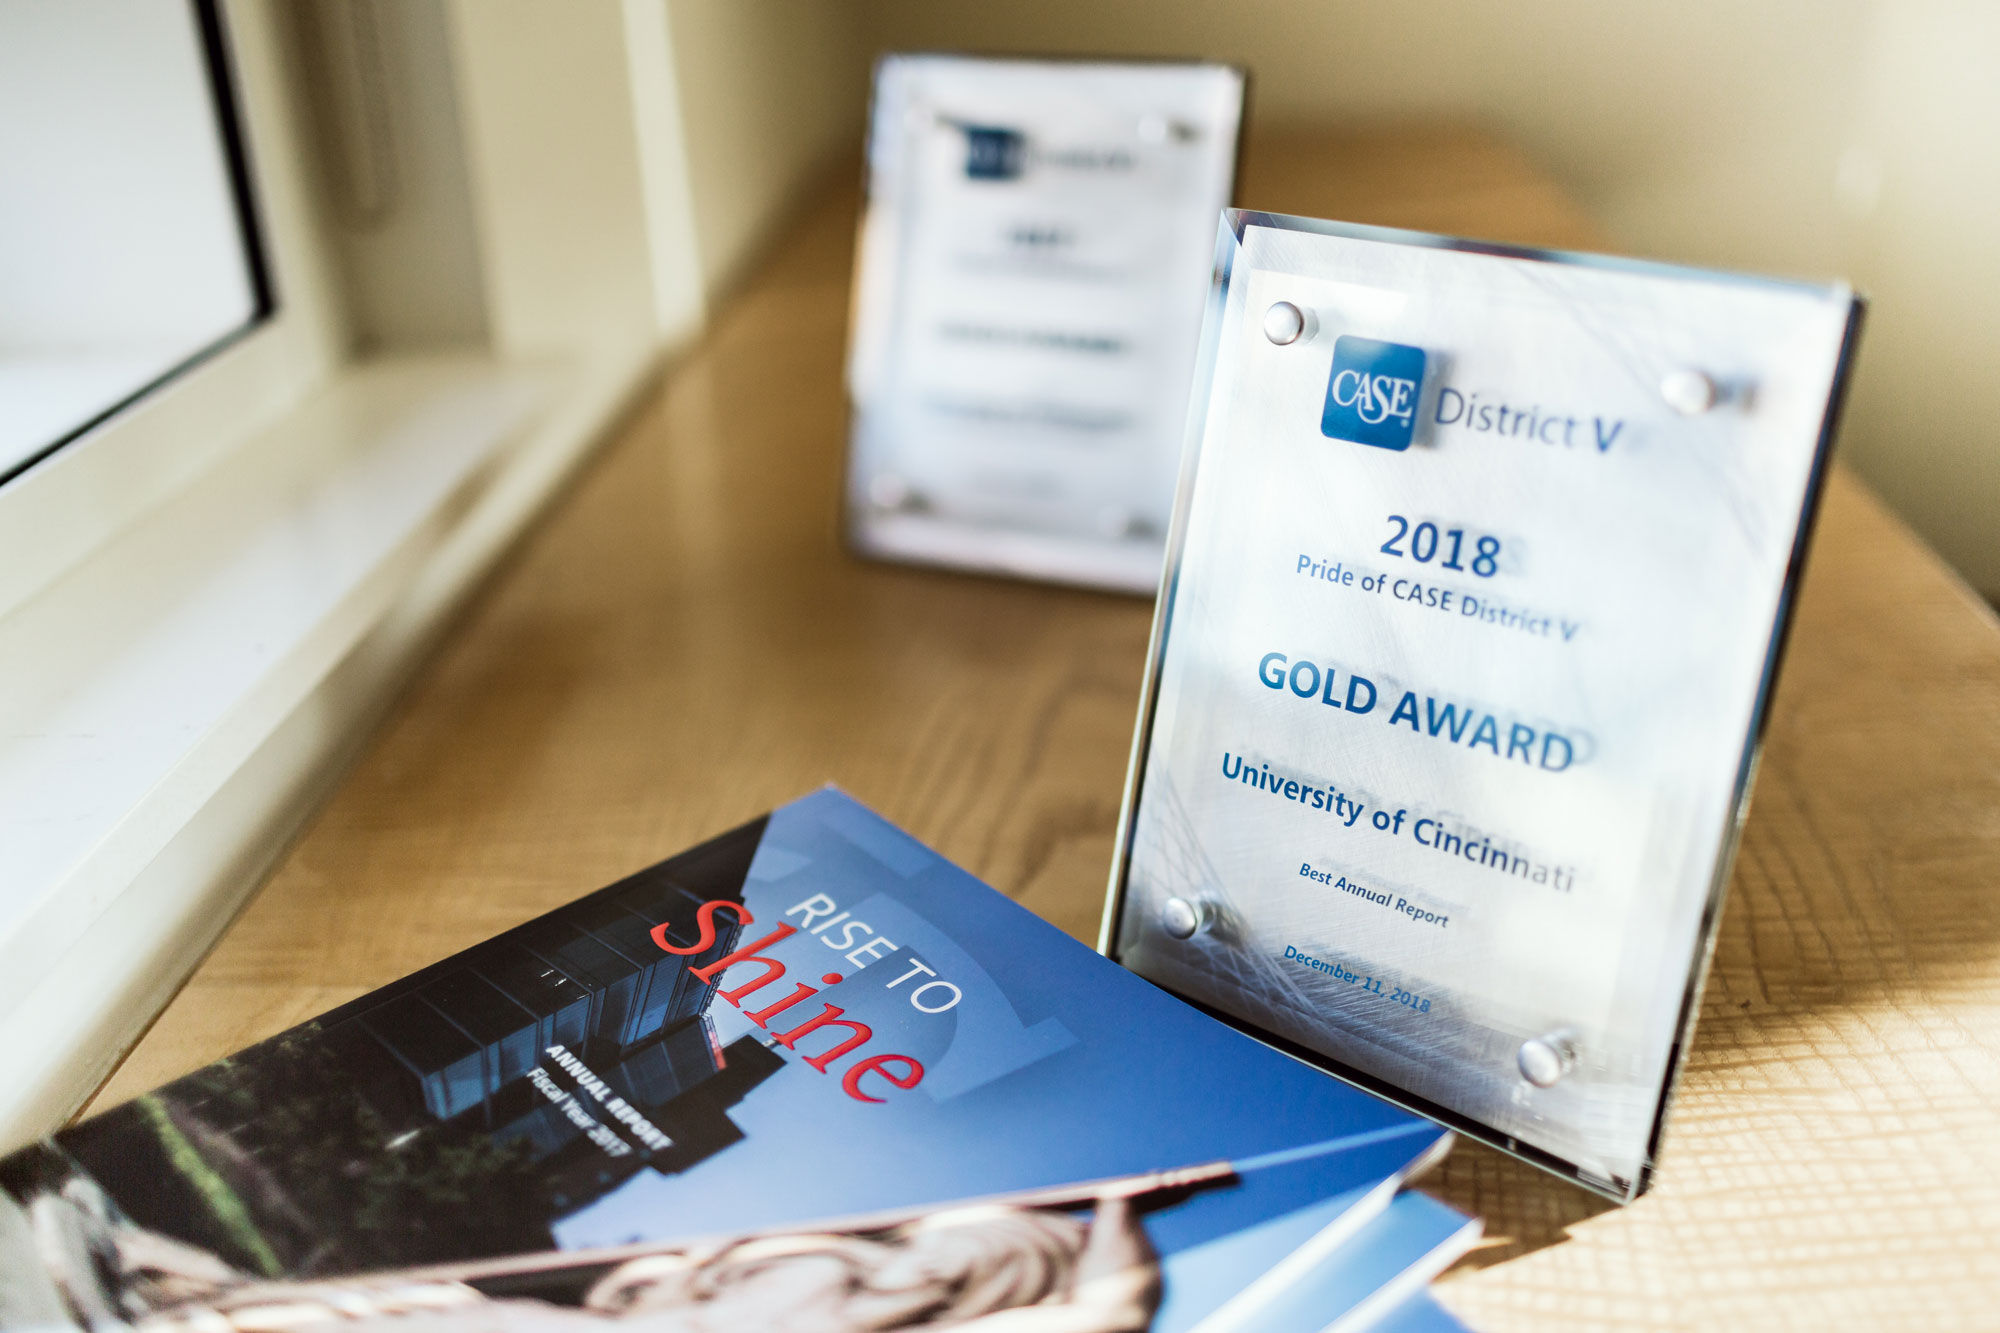 The two CASE Awards along with the award-winning annual report.